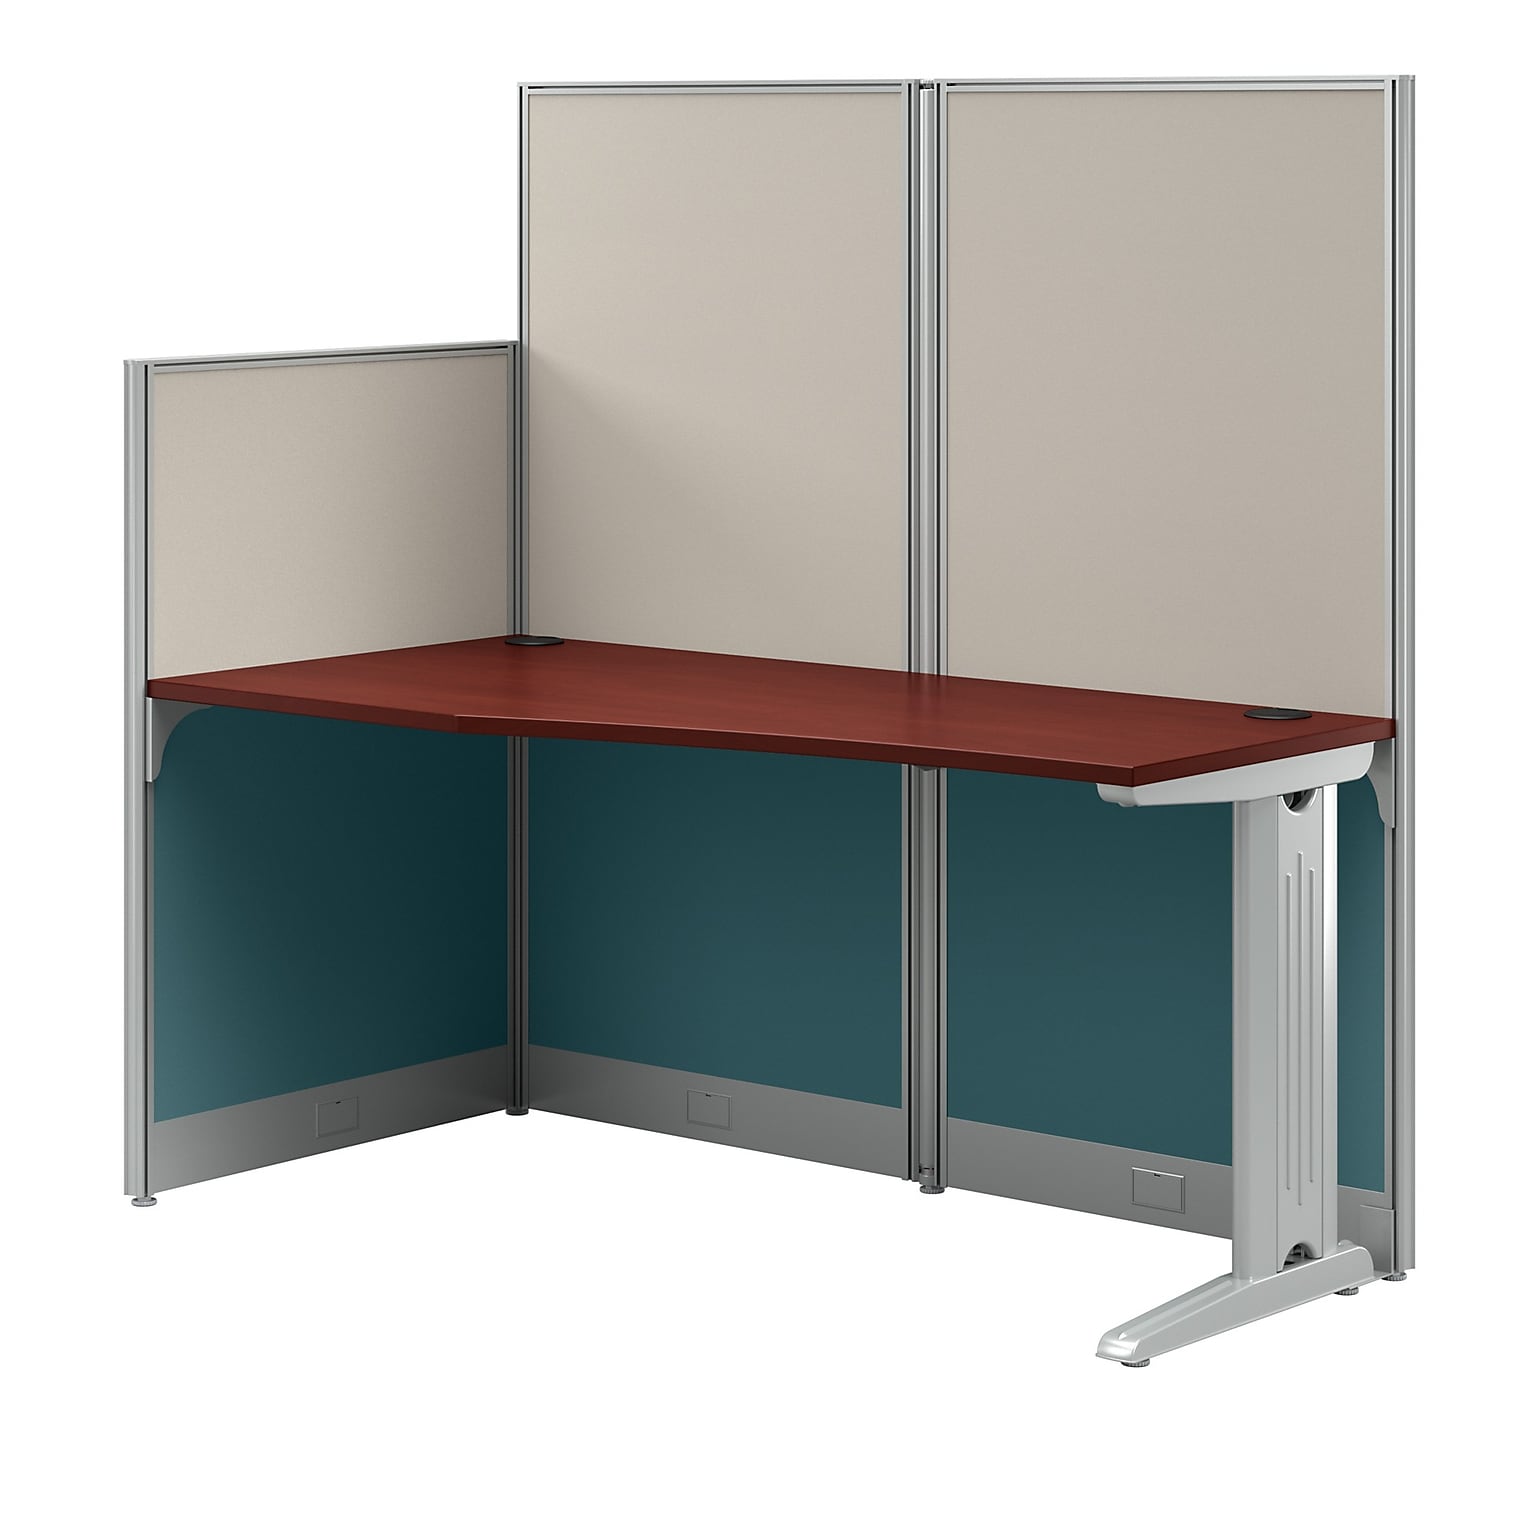 Bush Business Furniture Office in an Hour 63H x 65W Cubicle Workstation, Hansen Cherry (WC36492-03K)